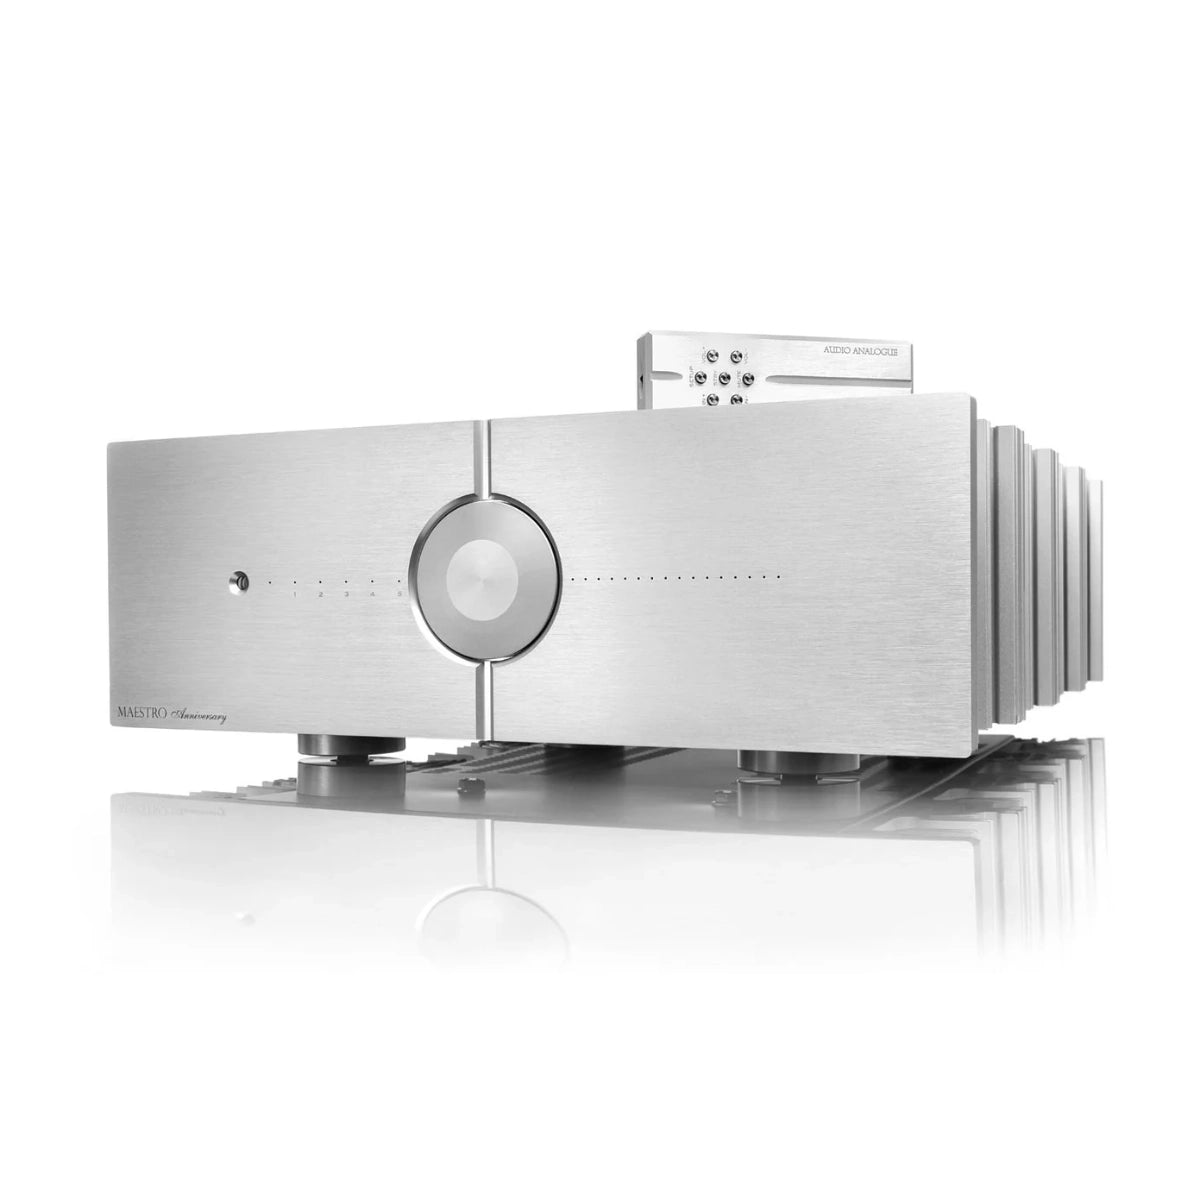 An image of Audio Analogue's Maestro 150W Integrated Amplifier in silver finish.